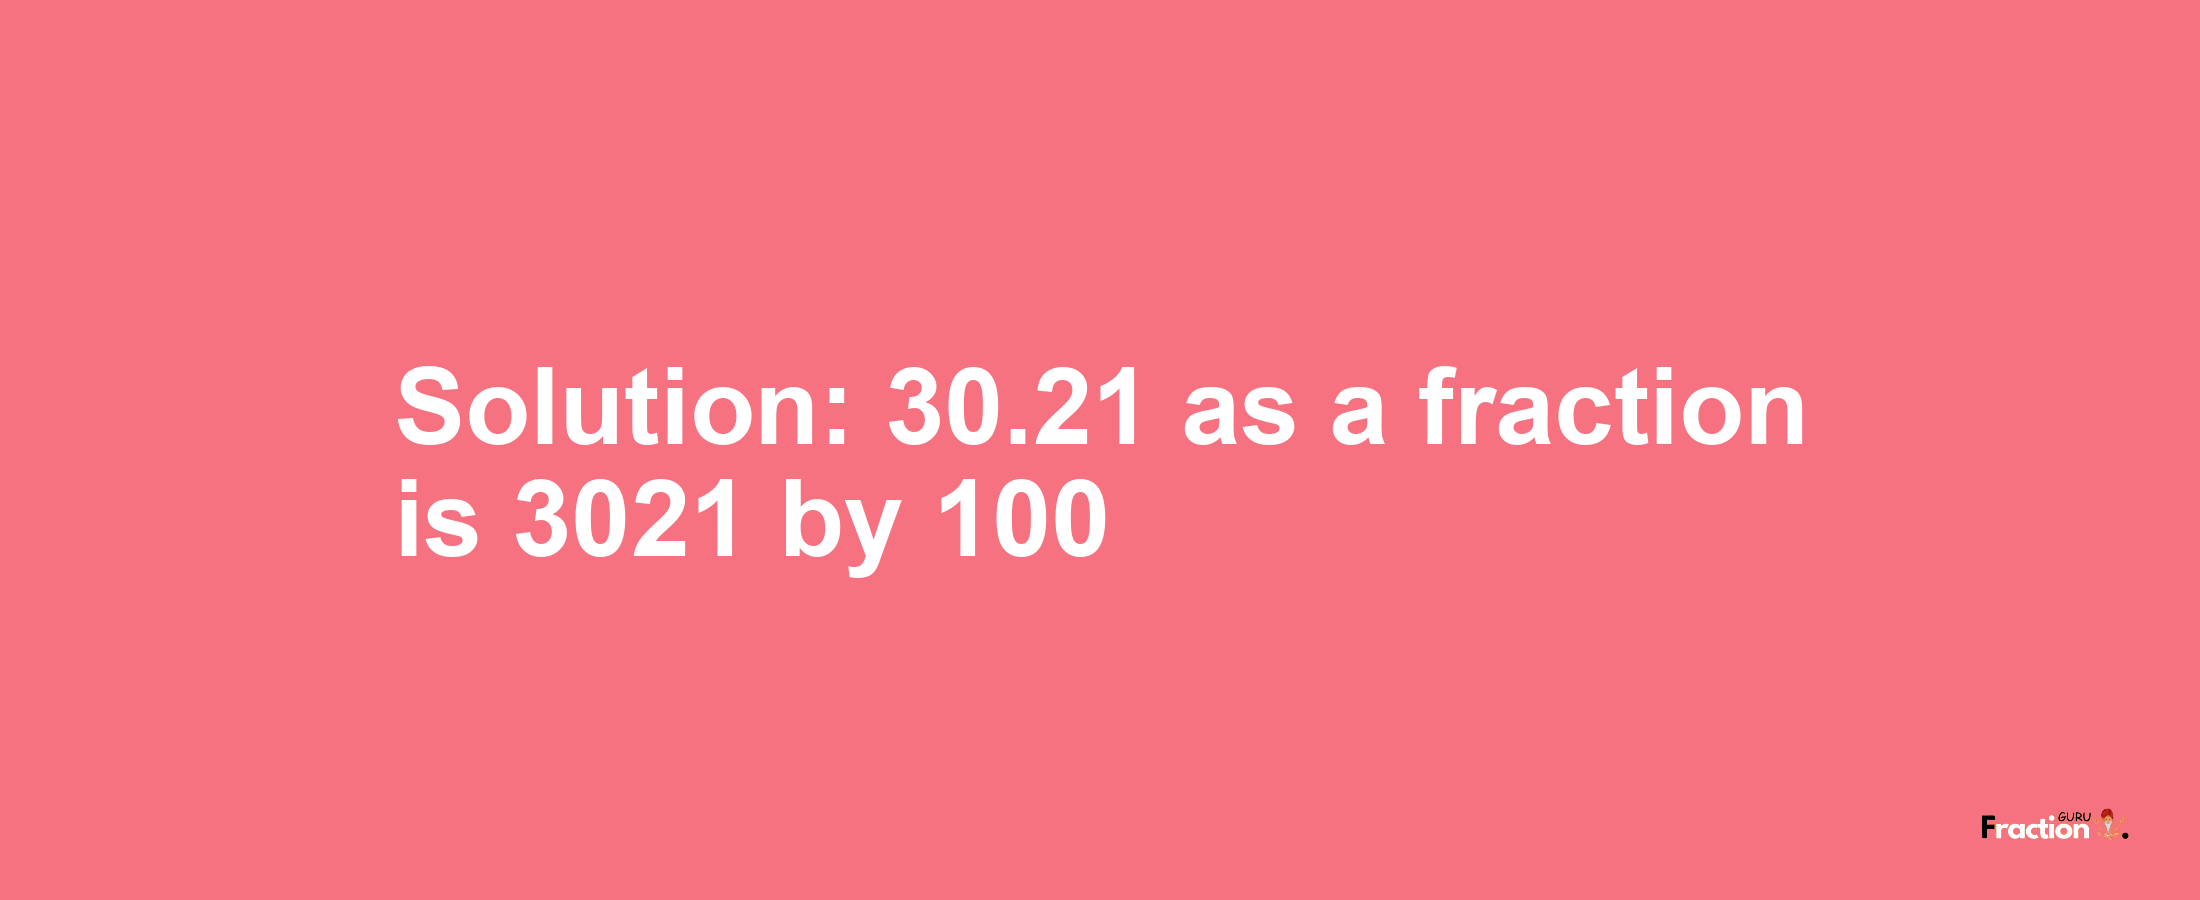 Solution:30.21 as a fraction is 3021/100